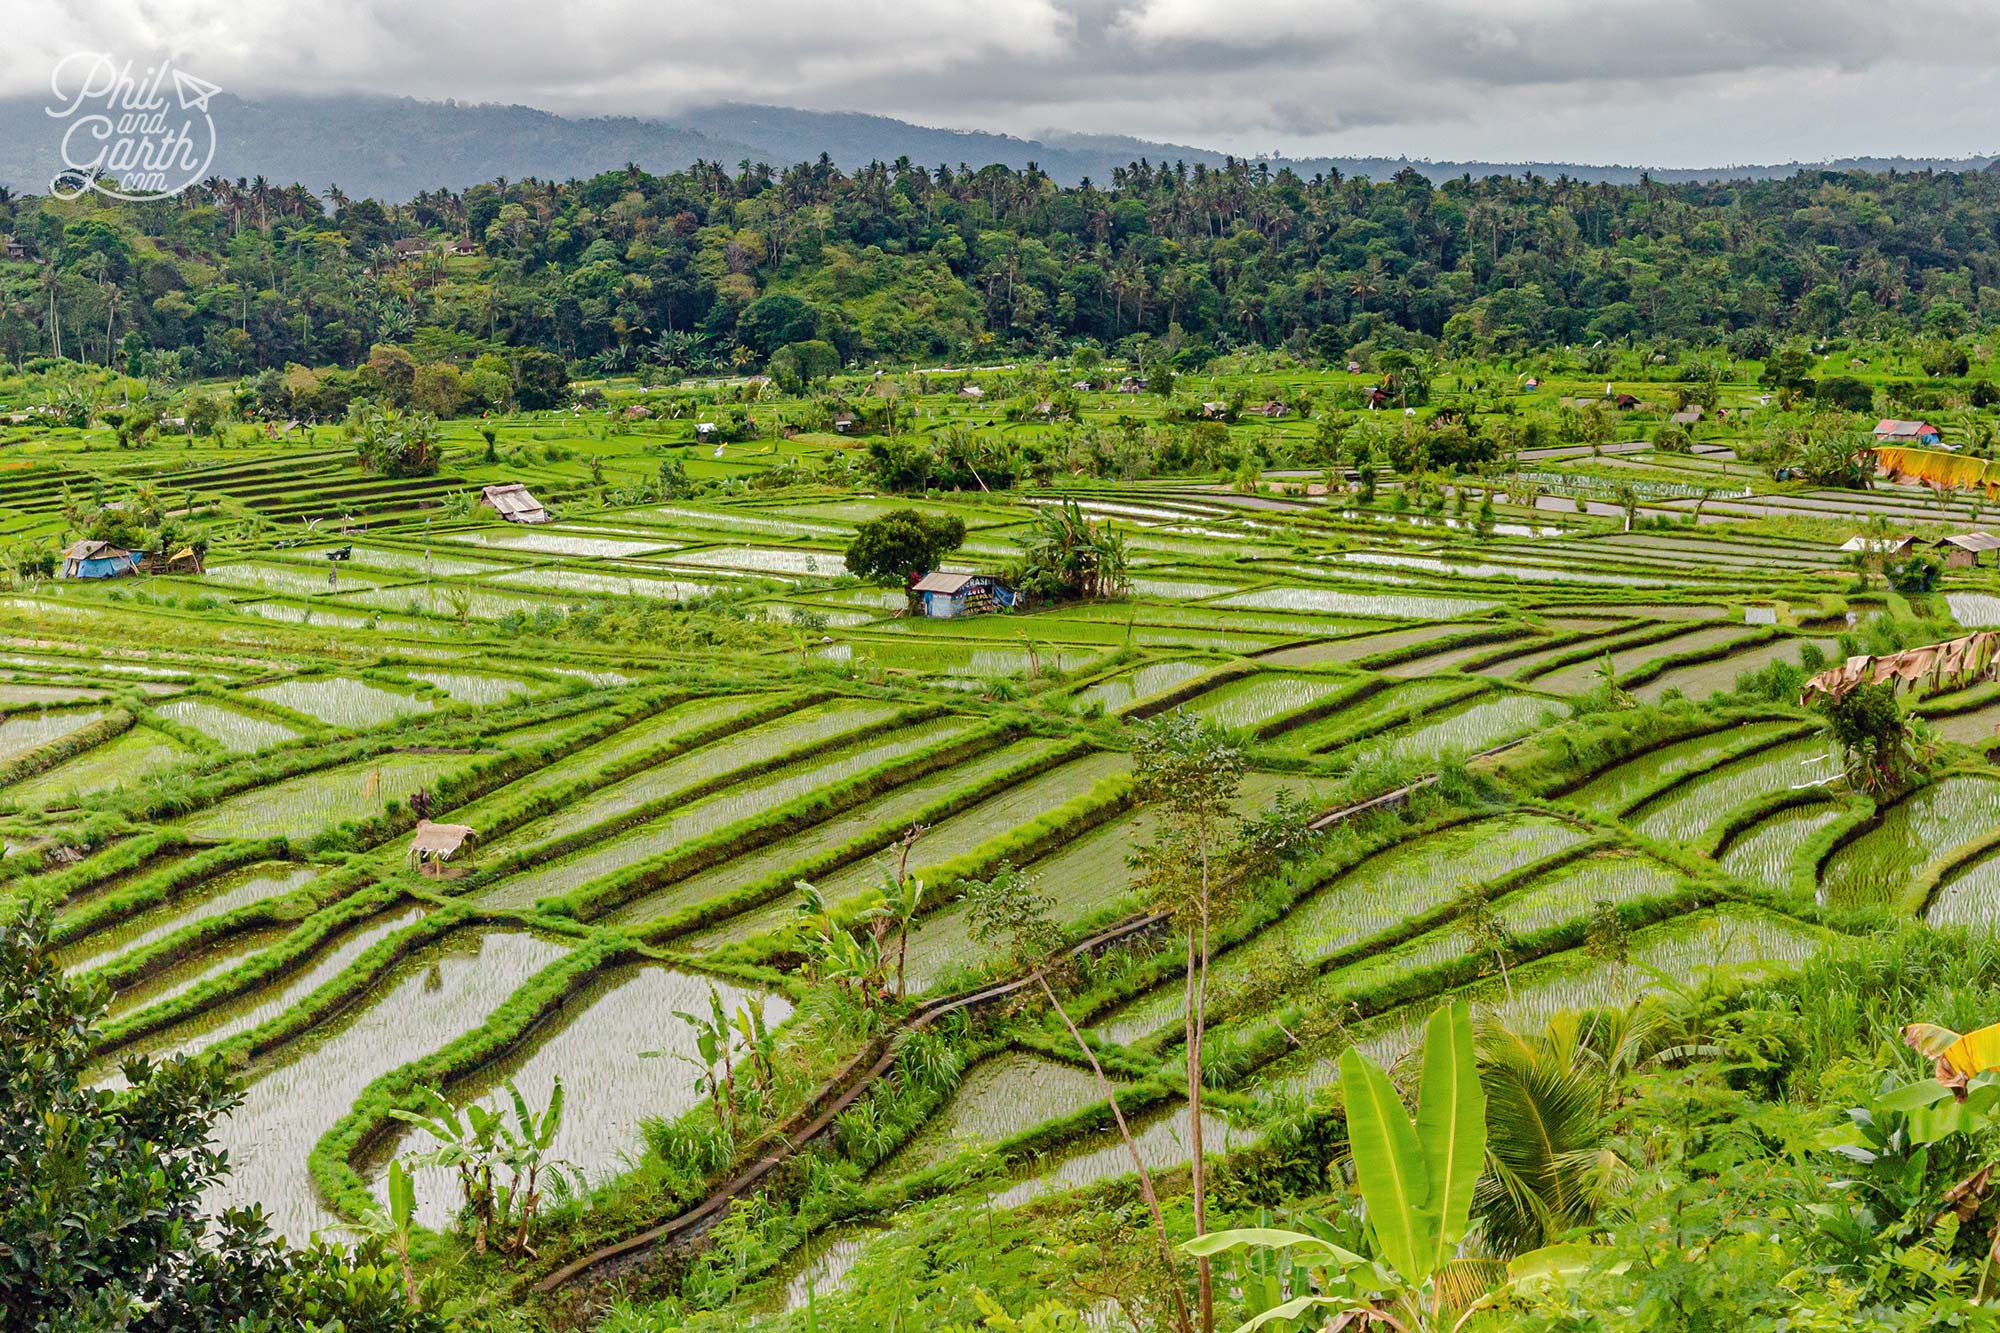 There's some amazing views of rice terraces off the main road close to Tirta Gangga